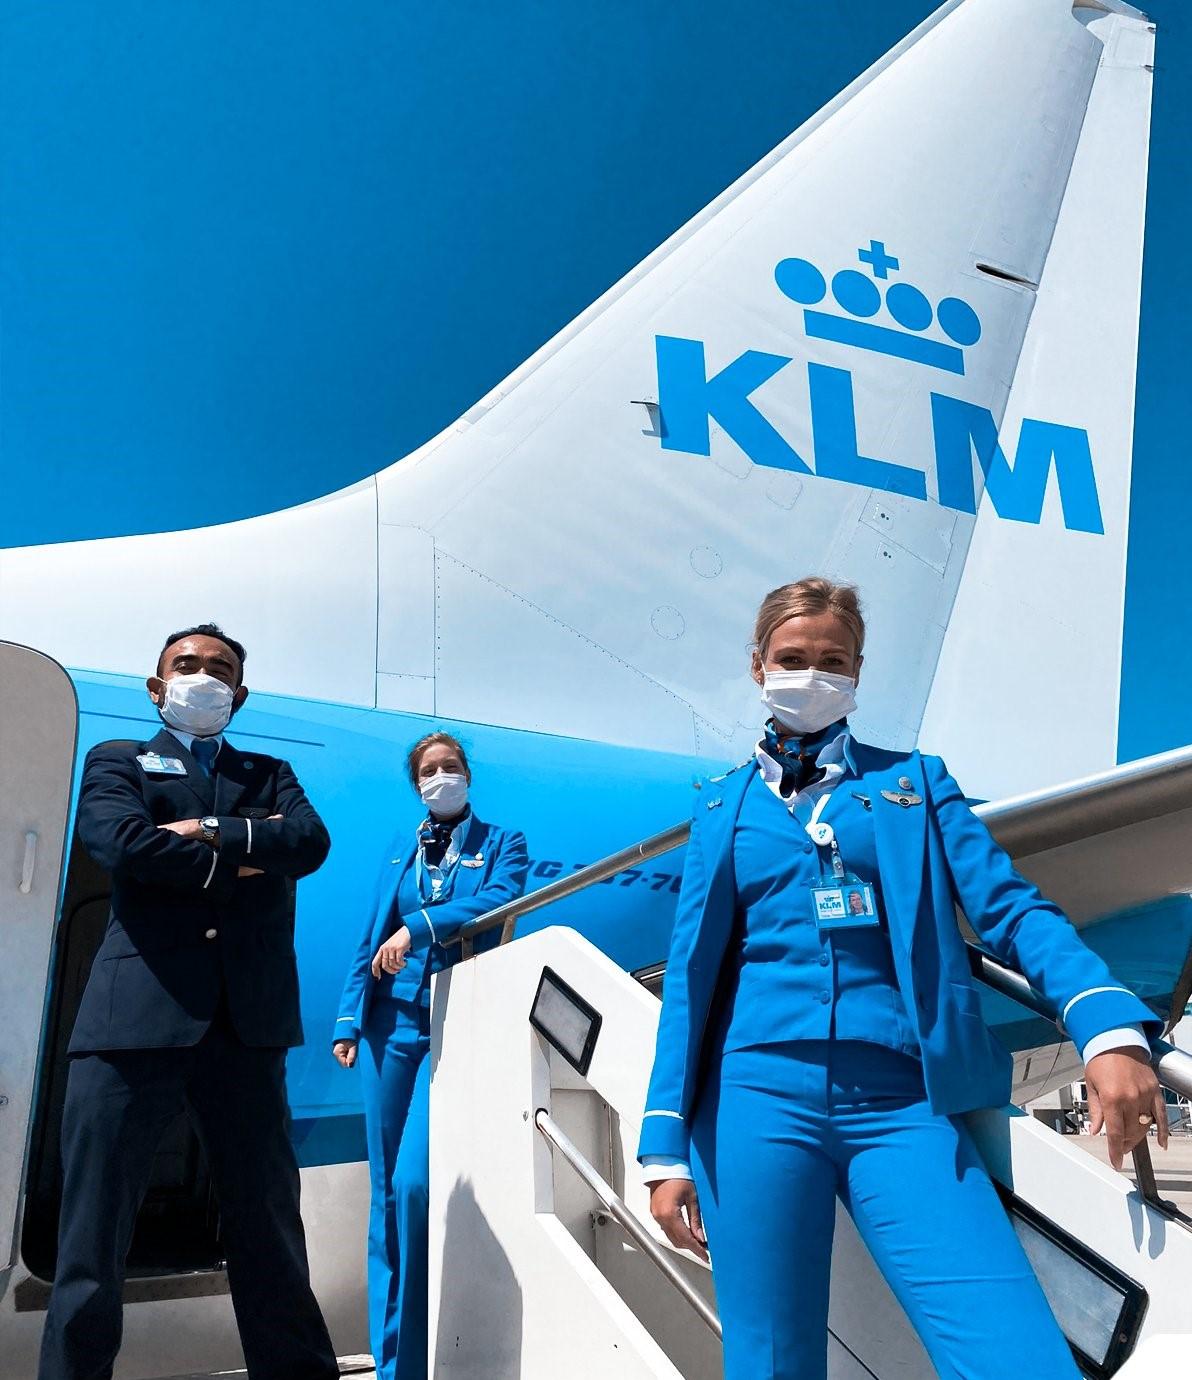 KLM Airlines crew